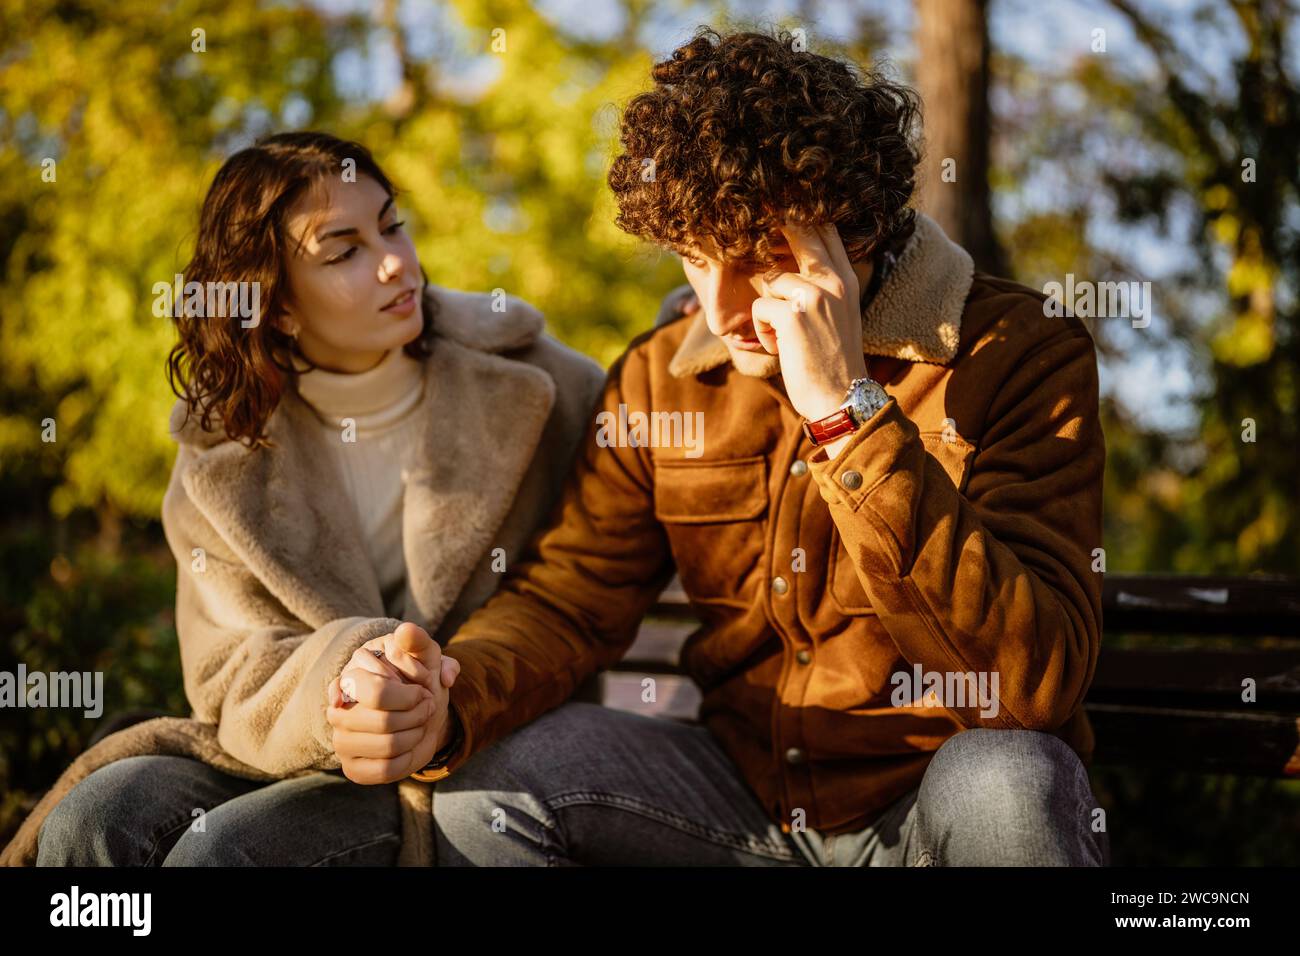 Young couple is sitting in park on sunny day. Man is sad and woman in consoling him. Stock Photo